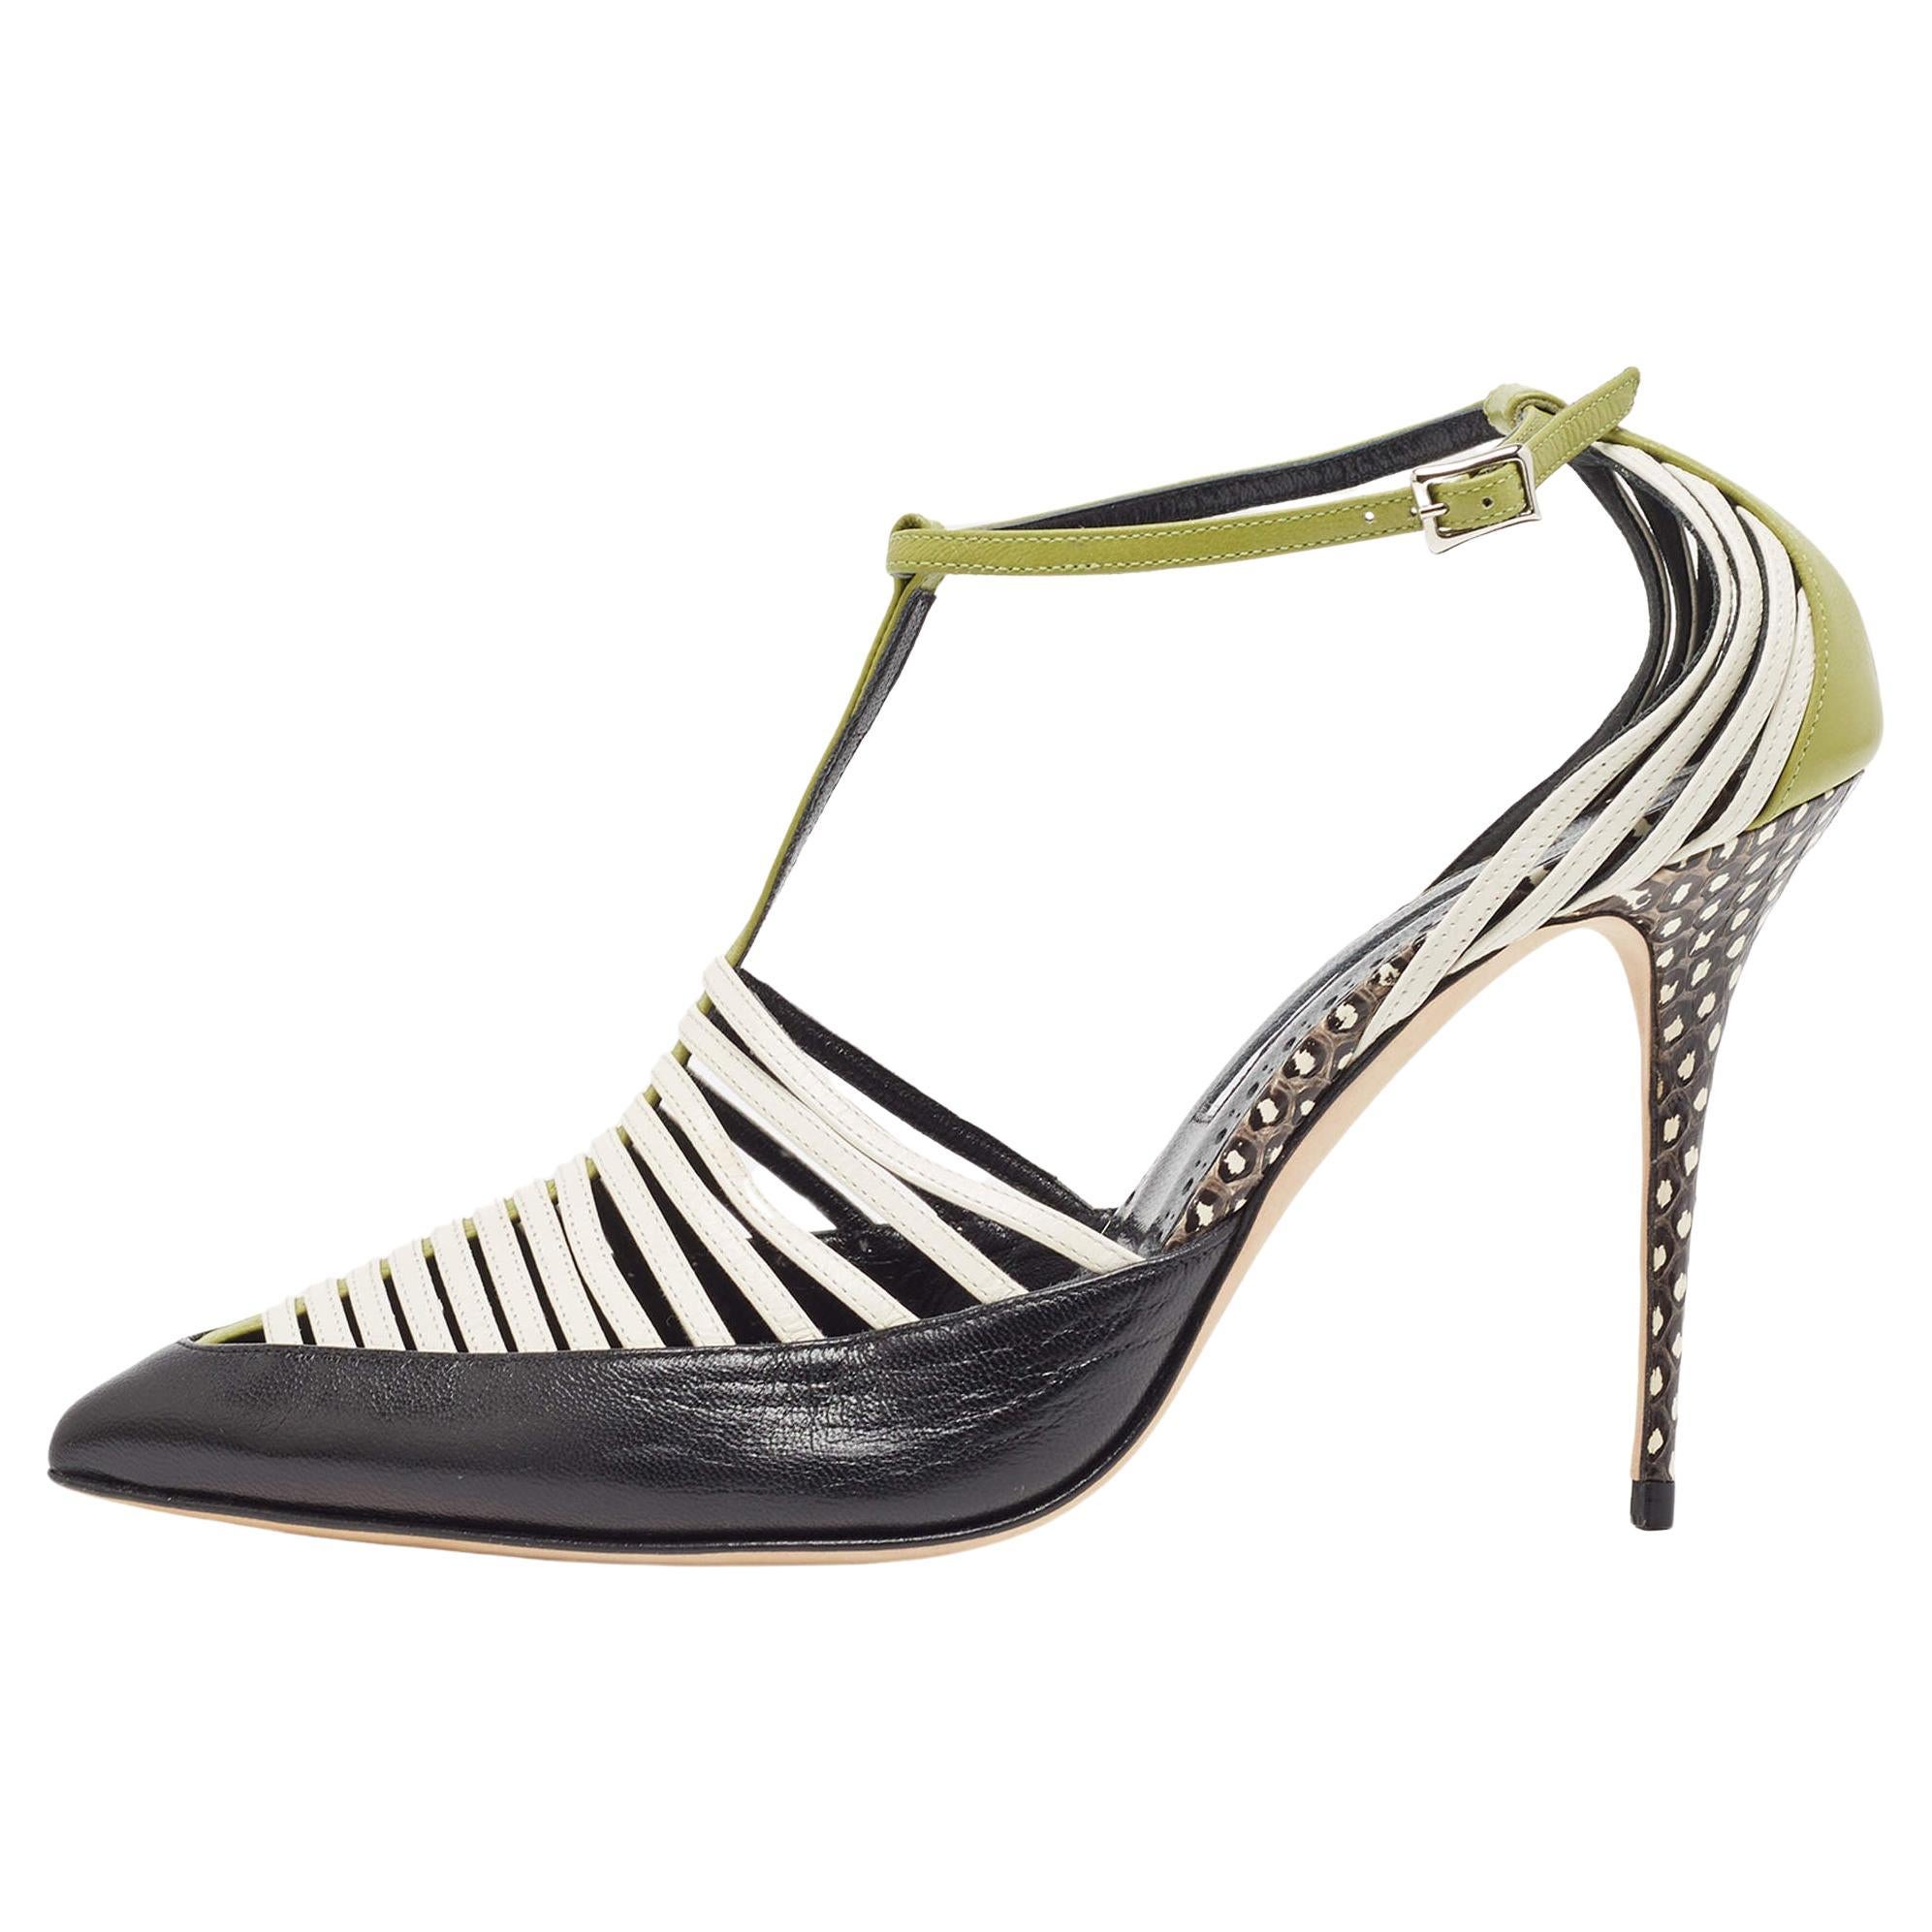 Manolo Blahnik Multicolor Watersnake and Leather Strappy Sandals Size 39.5 For Sale